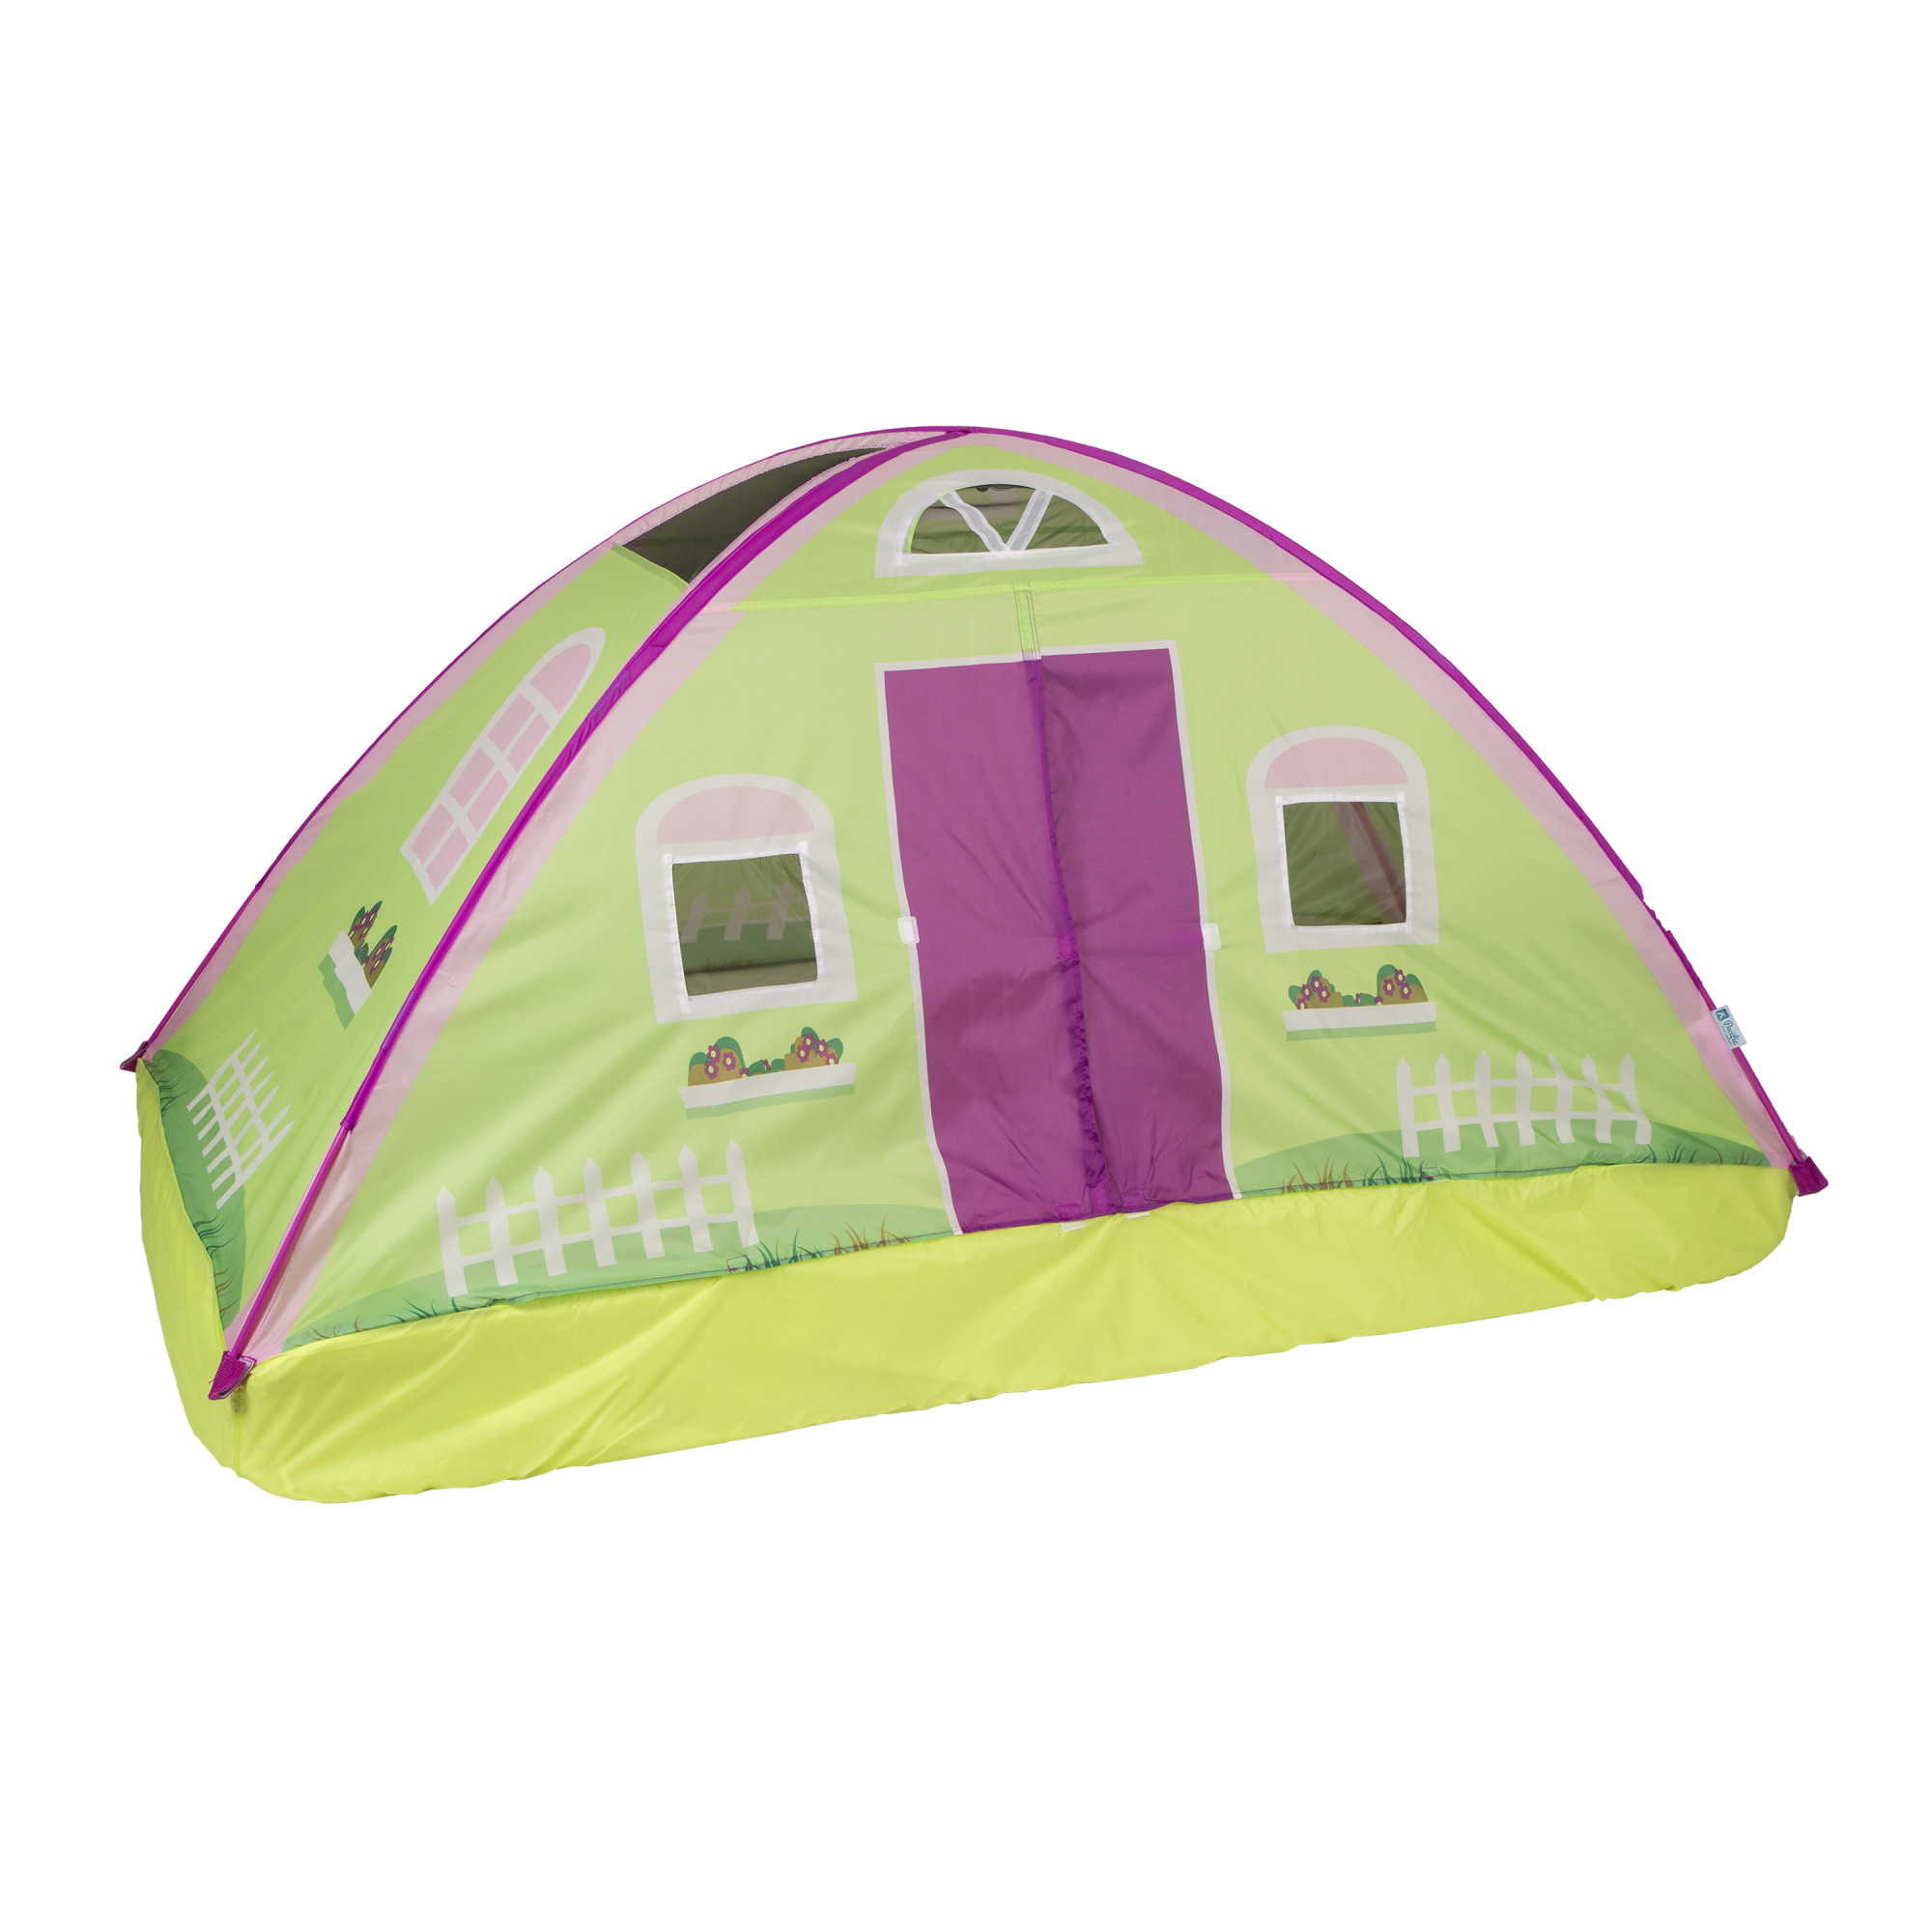 Pacific Play Tents Cottage Bed Tent, Twin - image 3 of 17